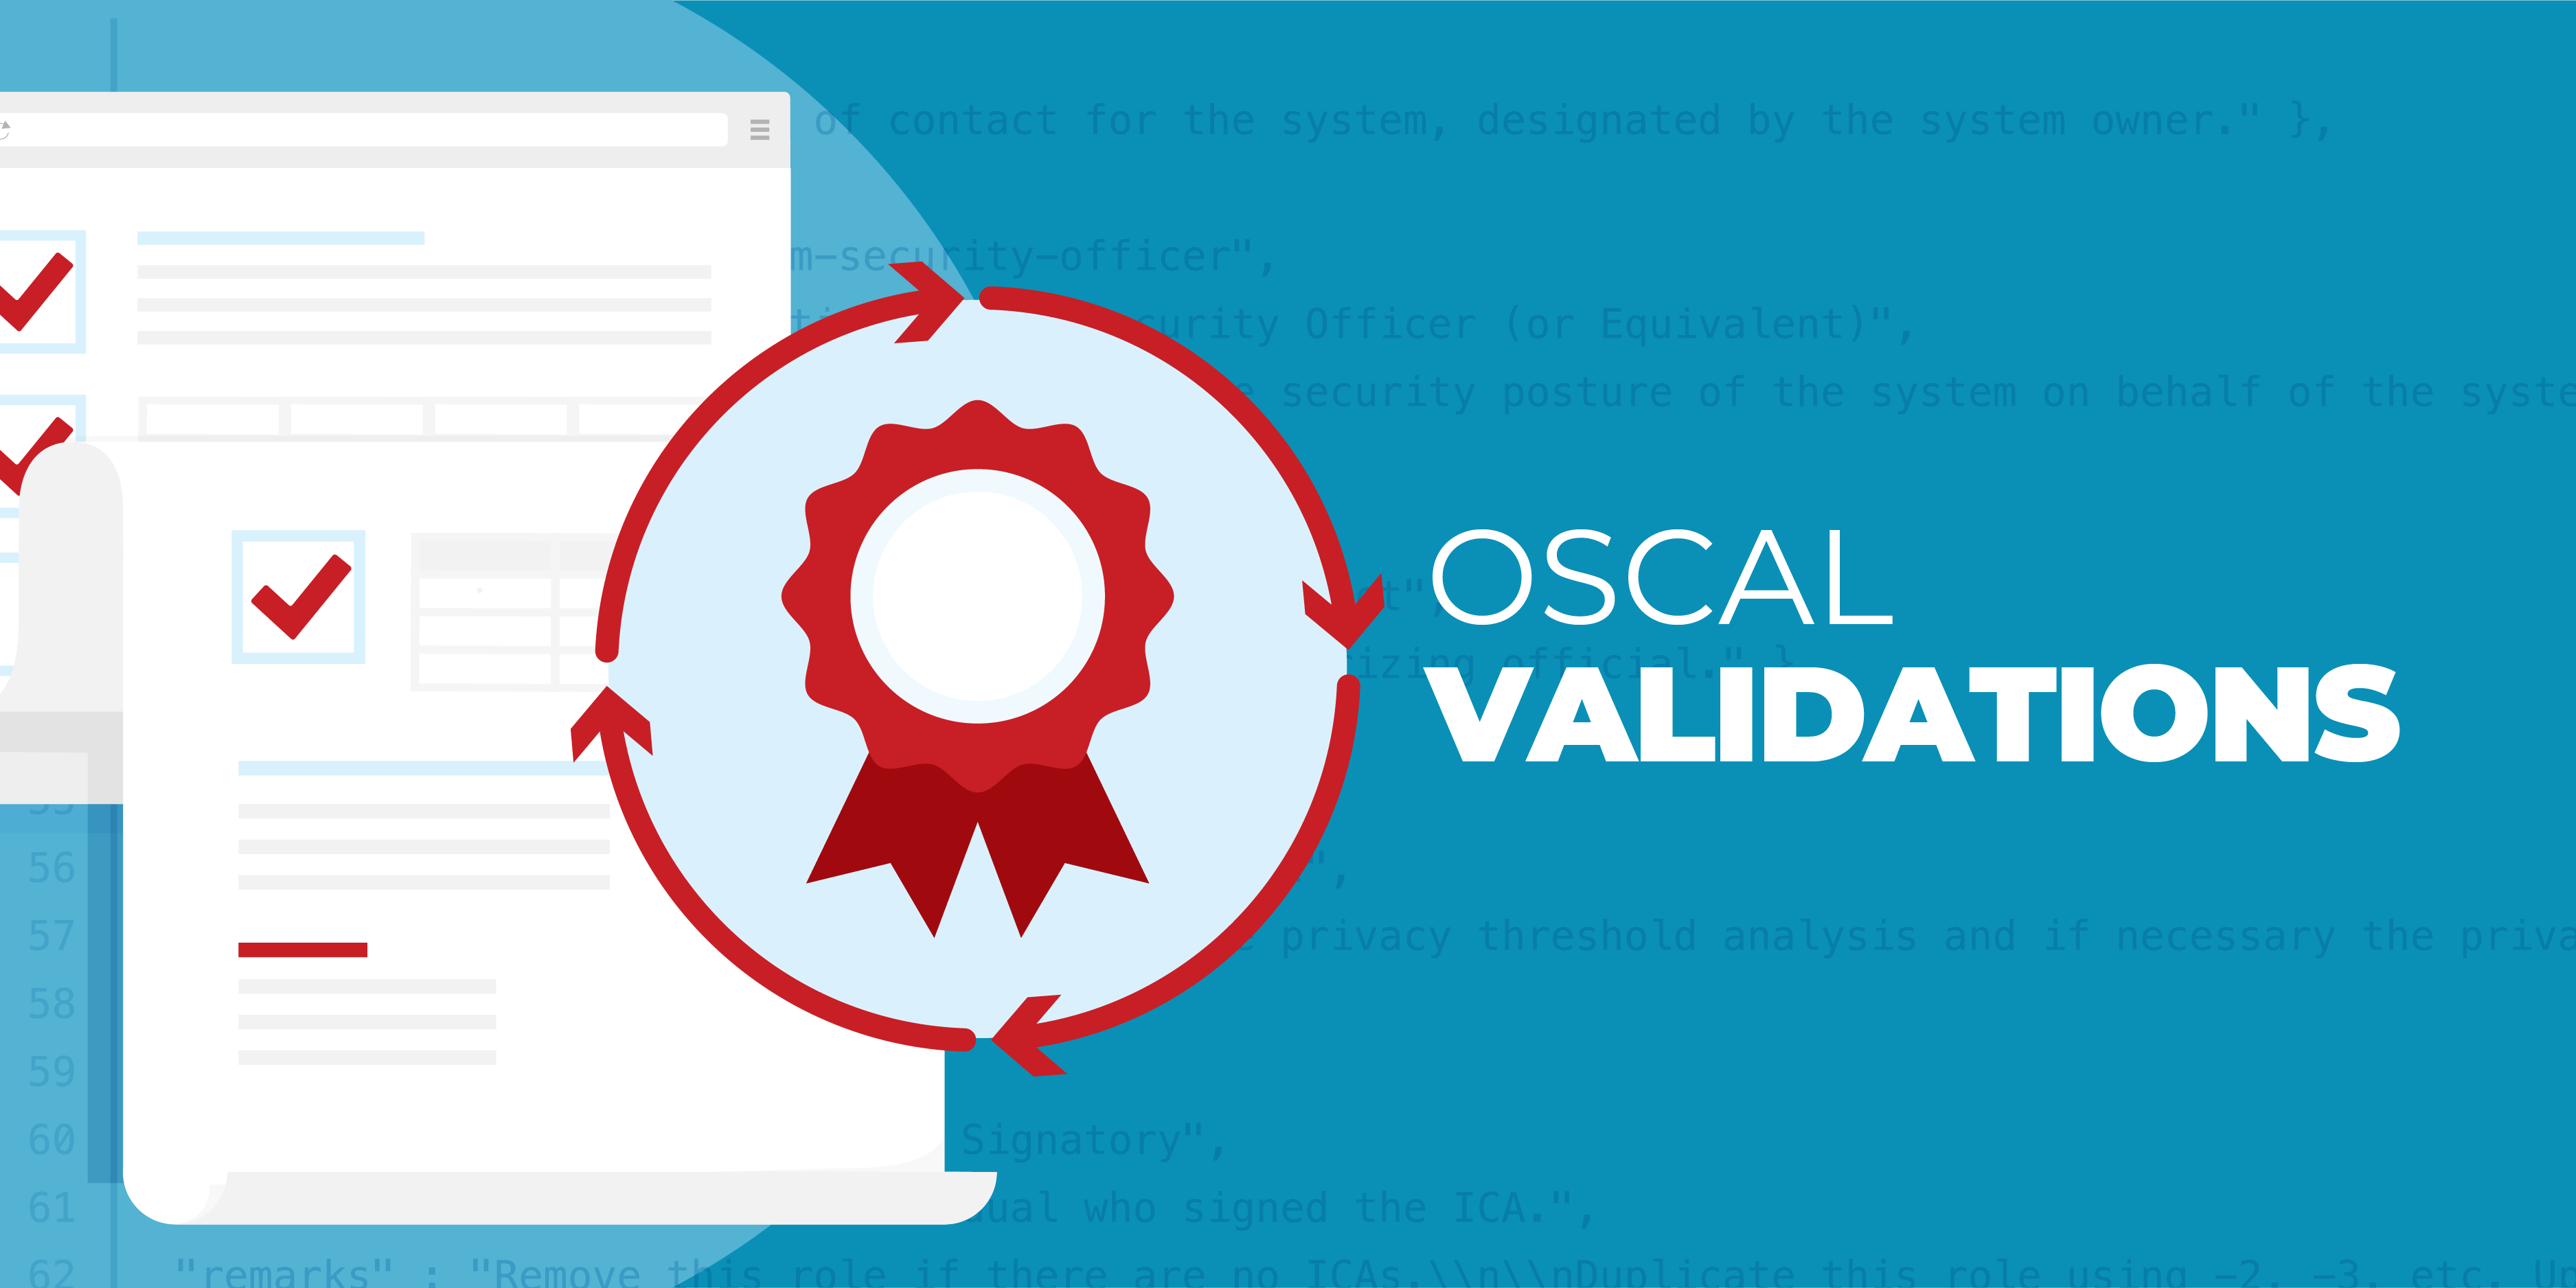 FedRAMP Releases OSCAL Validations